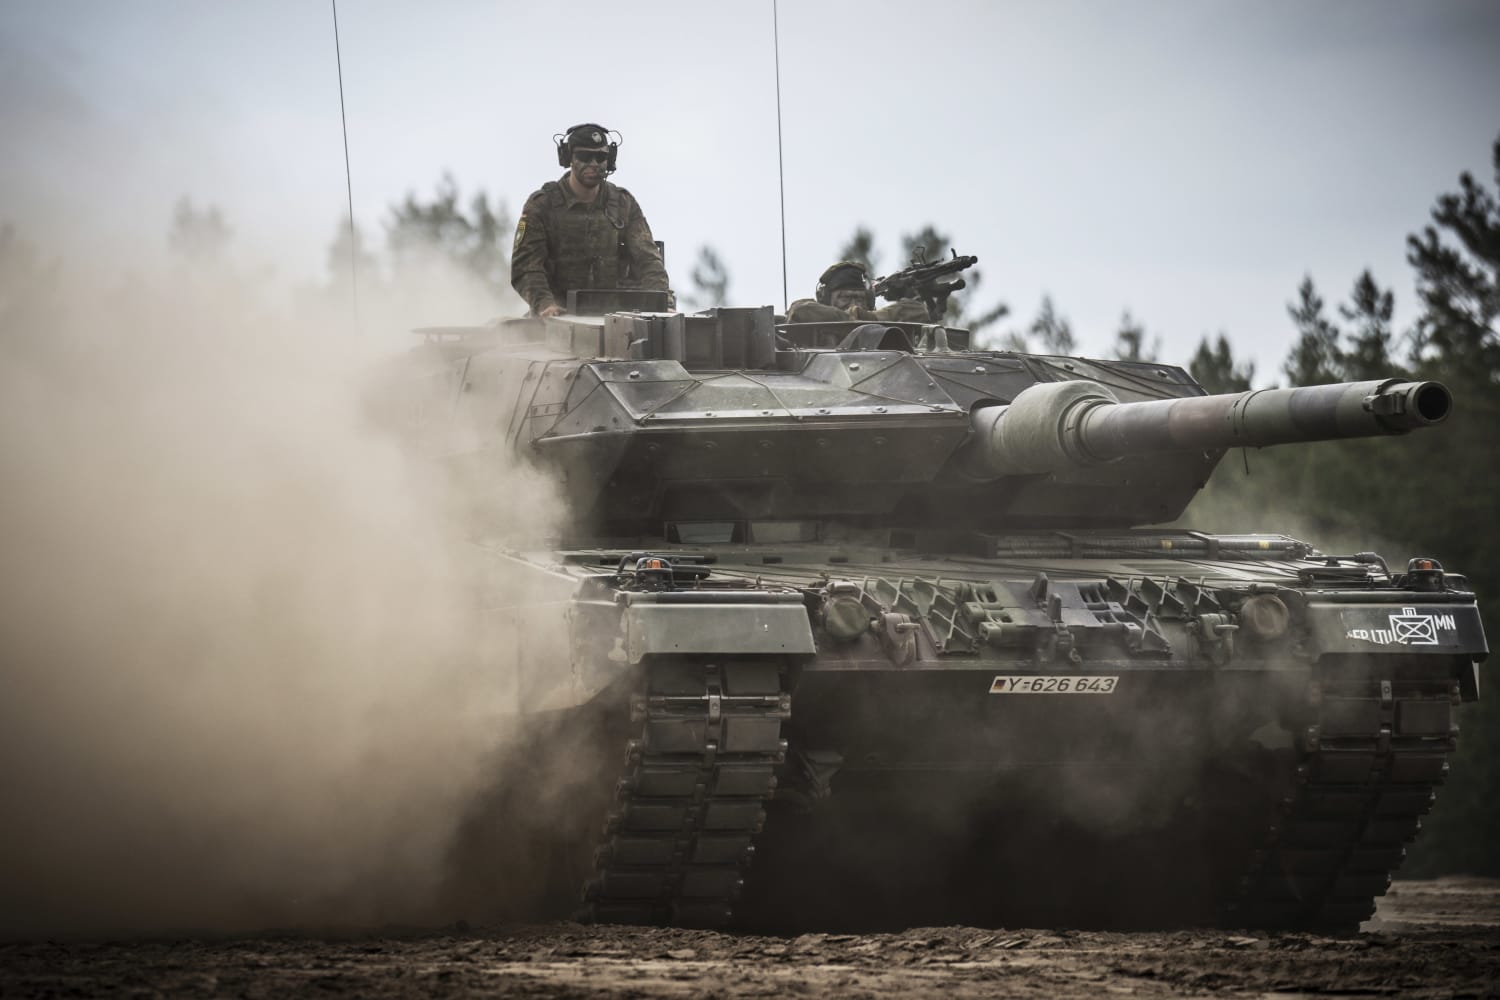 Ukraine is getting the tanks it pushed for, ending a rift among Western allies